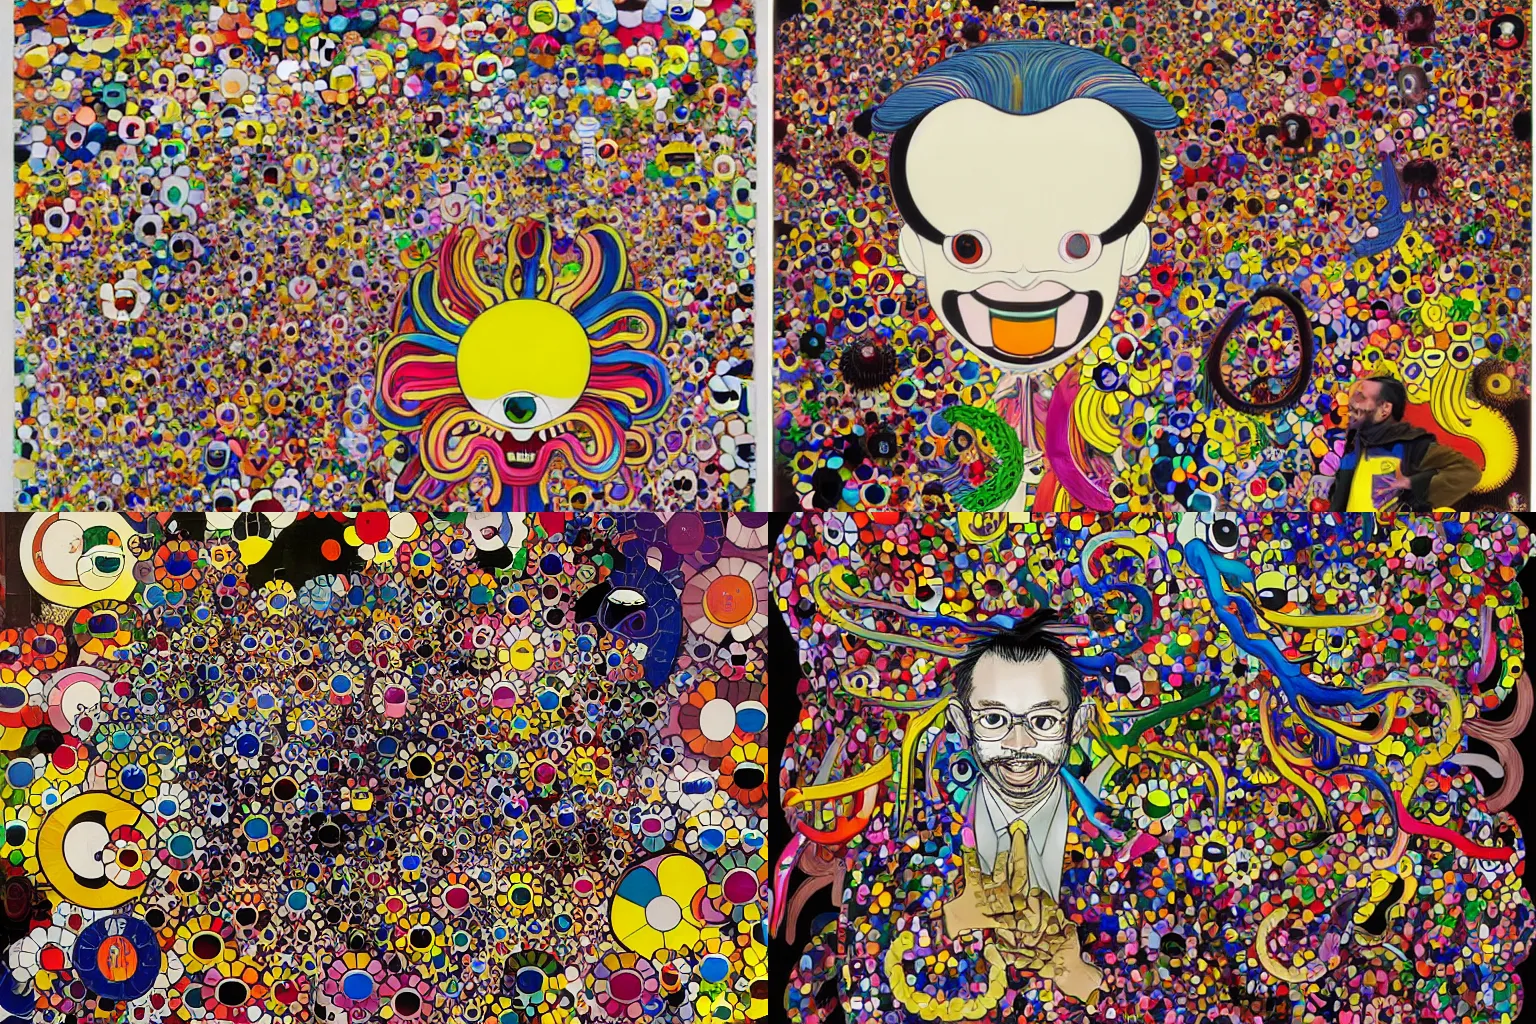 Prompt: the portrait of Mr. DOB by takashi murakami, large black smile, A collage of multicolor starbursts and biomorphic forms, Vivid tentacles, a raving and chaotic creature, painterly spectacle of technical precision and cinematic bombast, virtually no peer or precedent, illustration